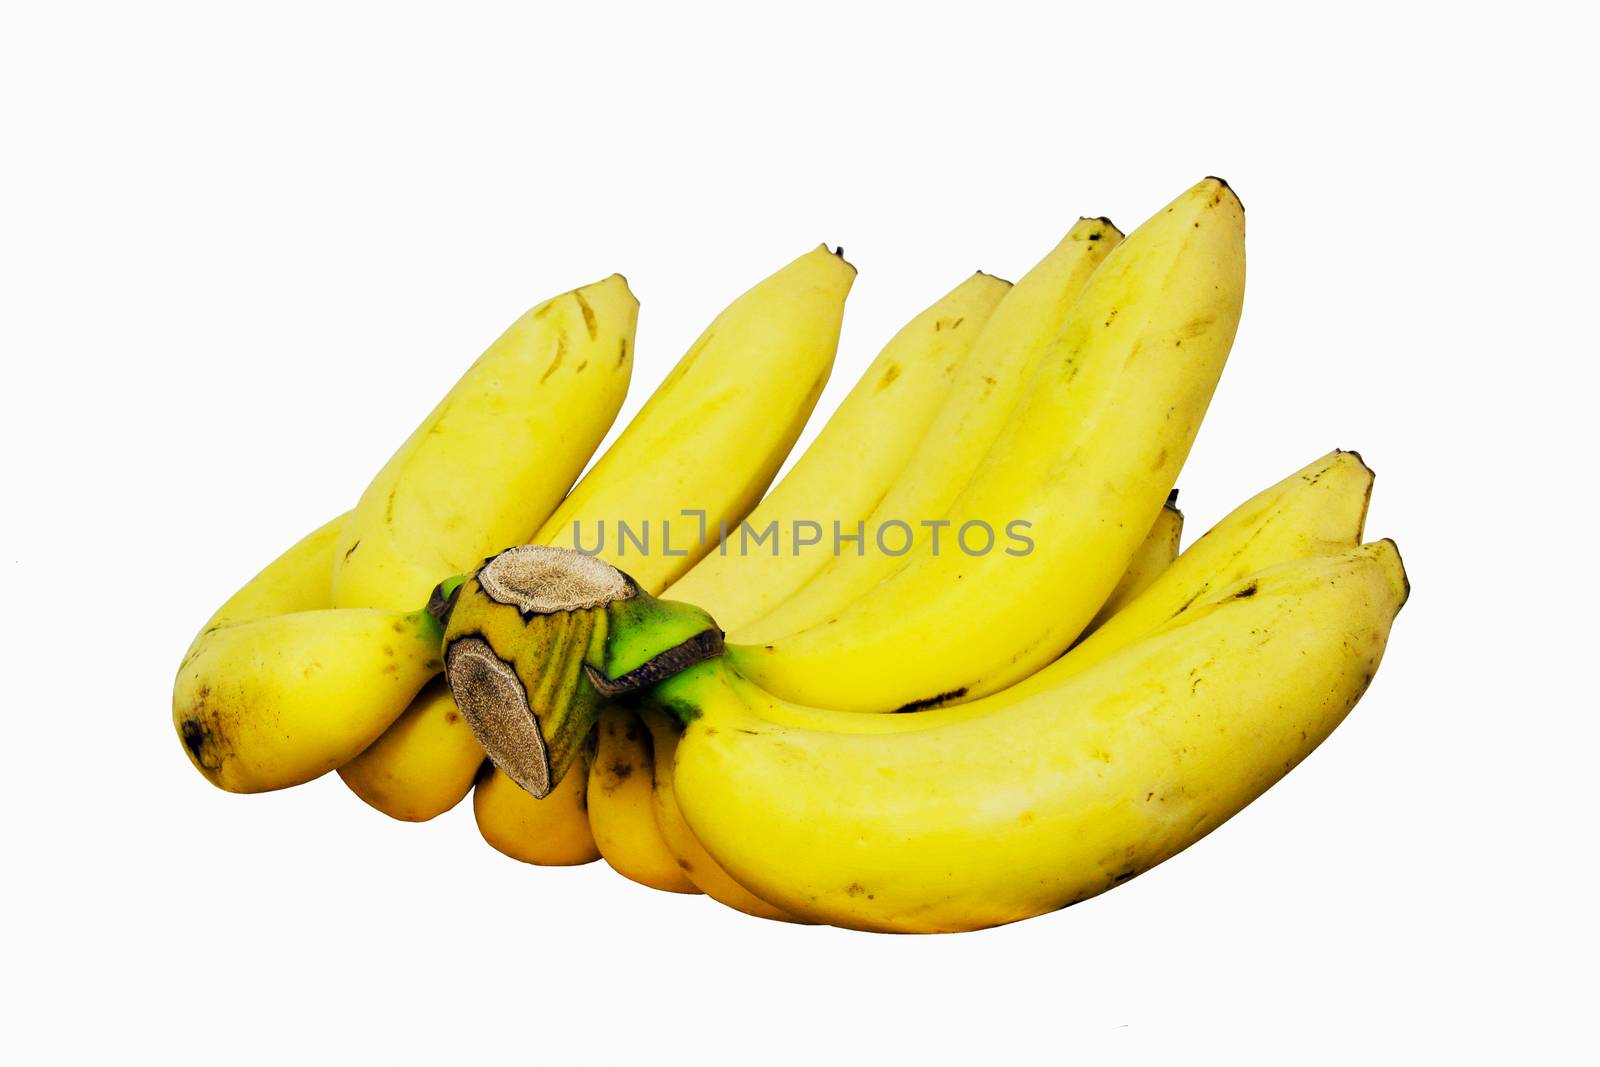 isolate comb of yellow bananas fruit on white background